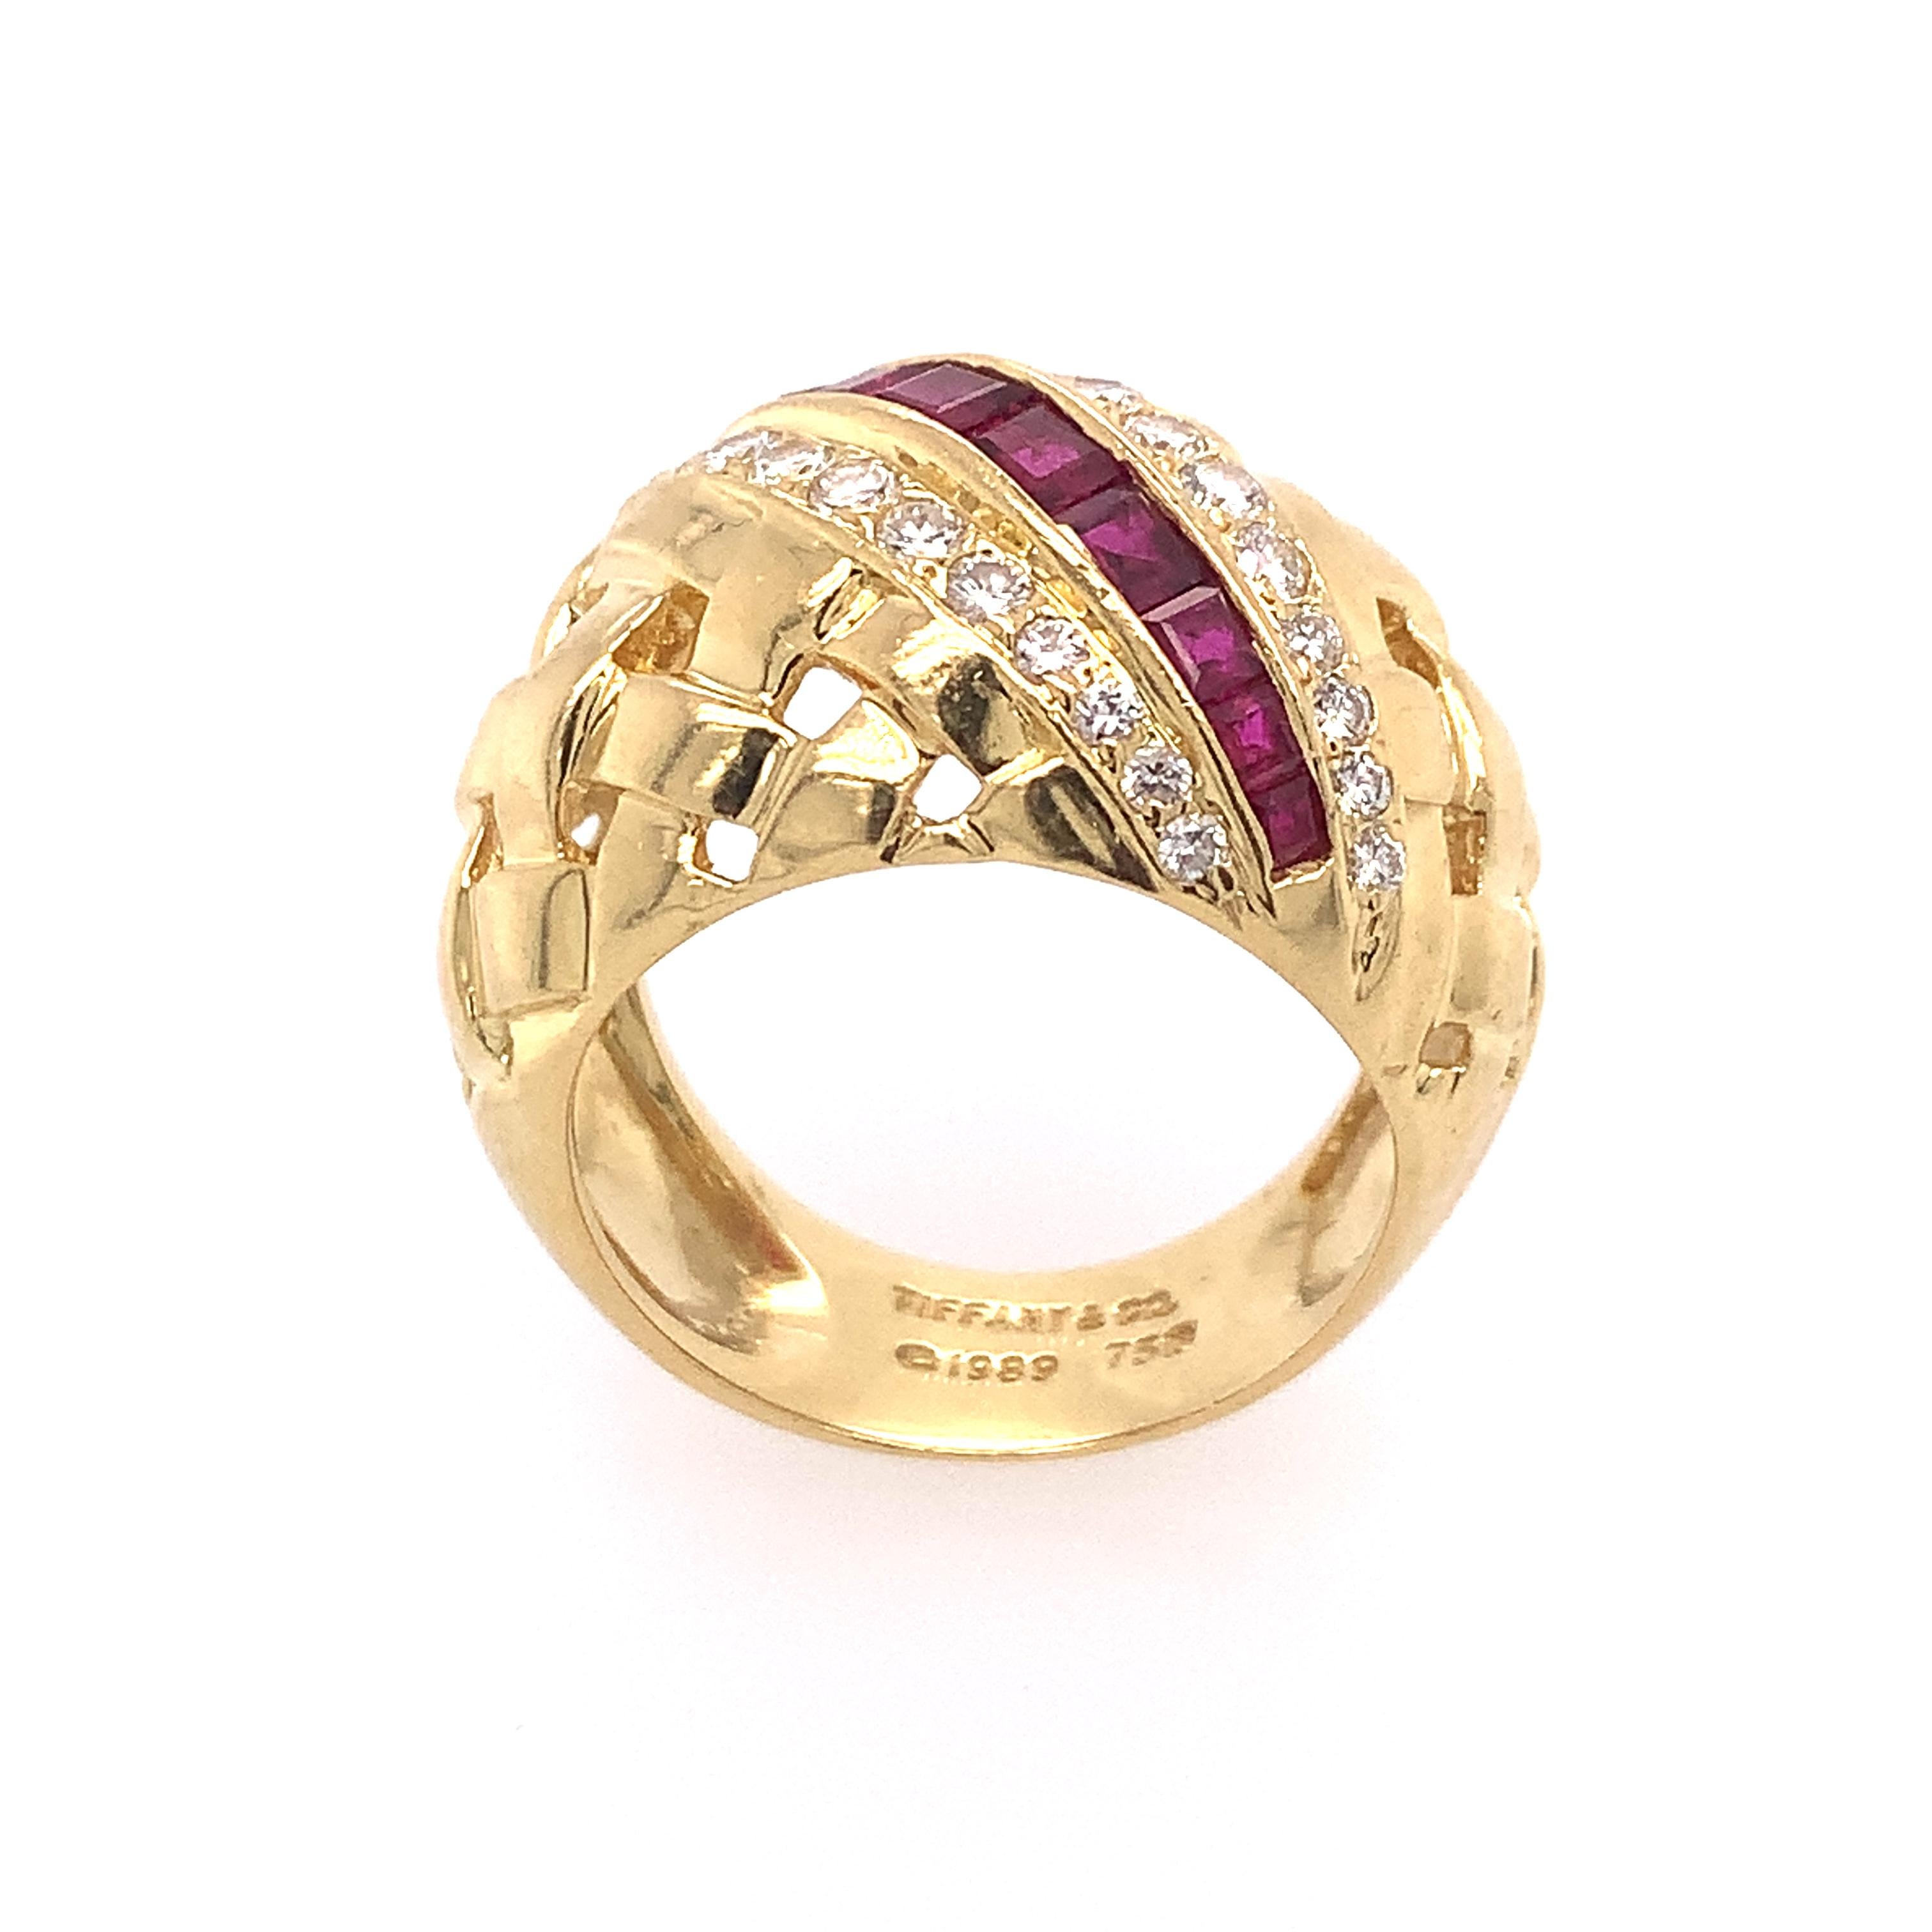 Vintage Tiffany & Co. 18K Yellow gold Vannerie dome ring featuring a woven motif set with twenty-eight (28) brilliant-cut round diamonds weighing an estimated 0.75 carats and eleven (11) square step-cut rubies weighing an estimated 0.75 carats. The